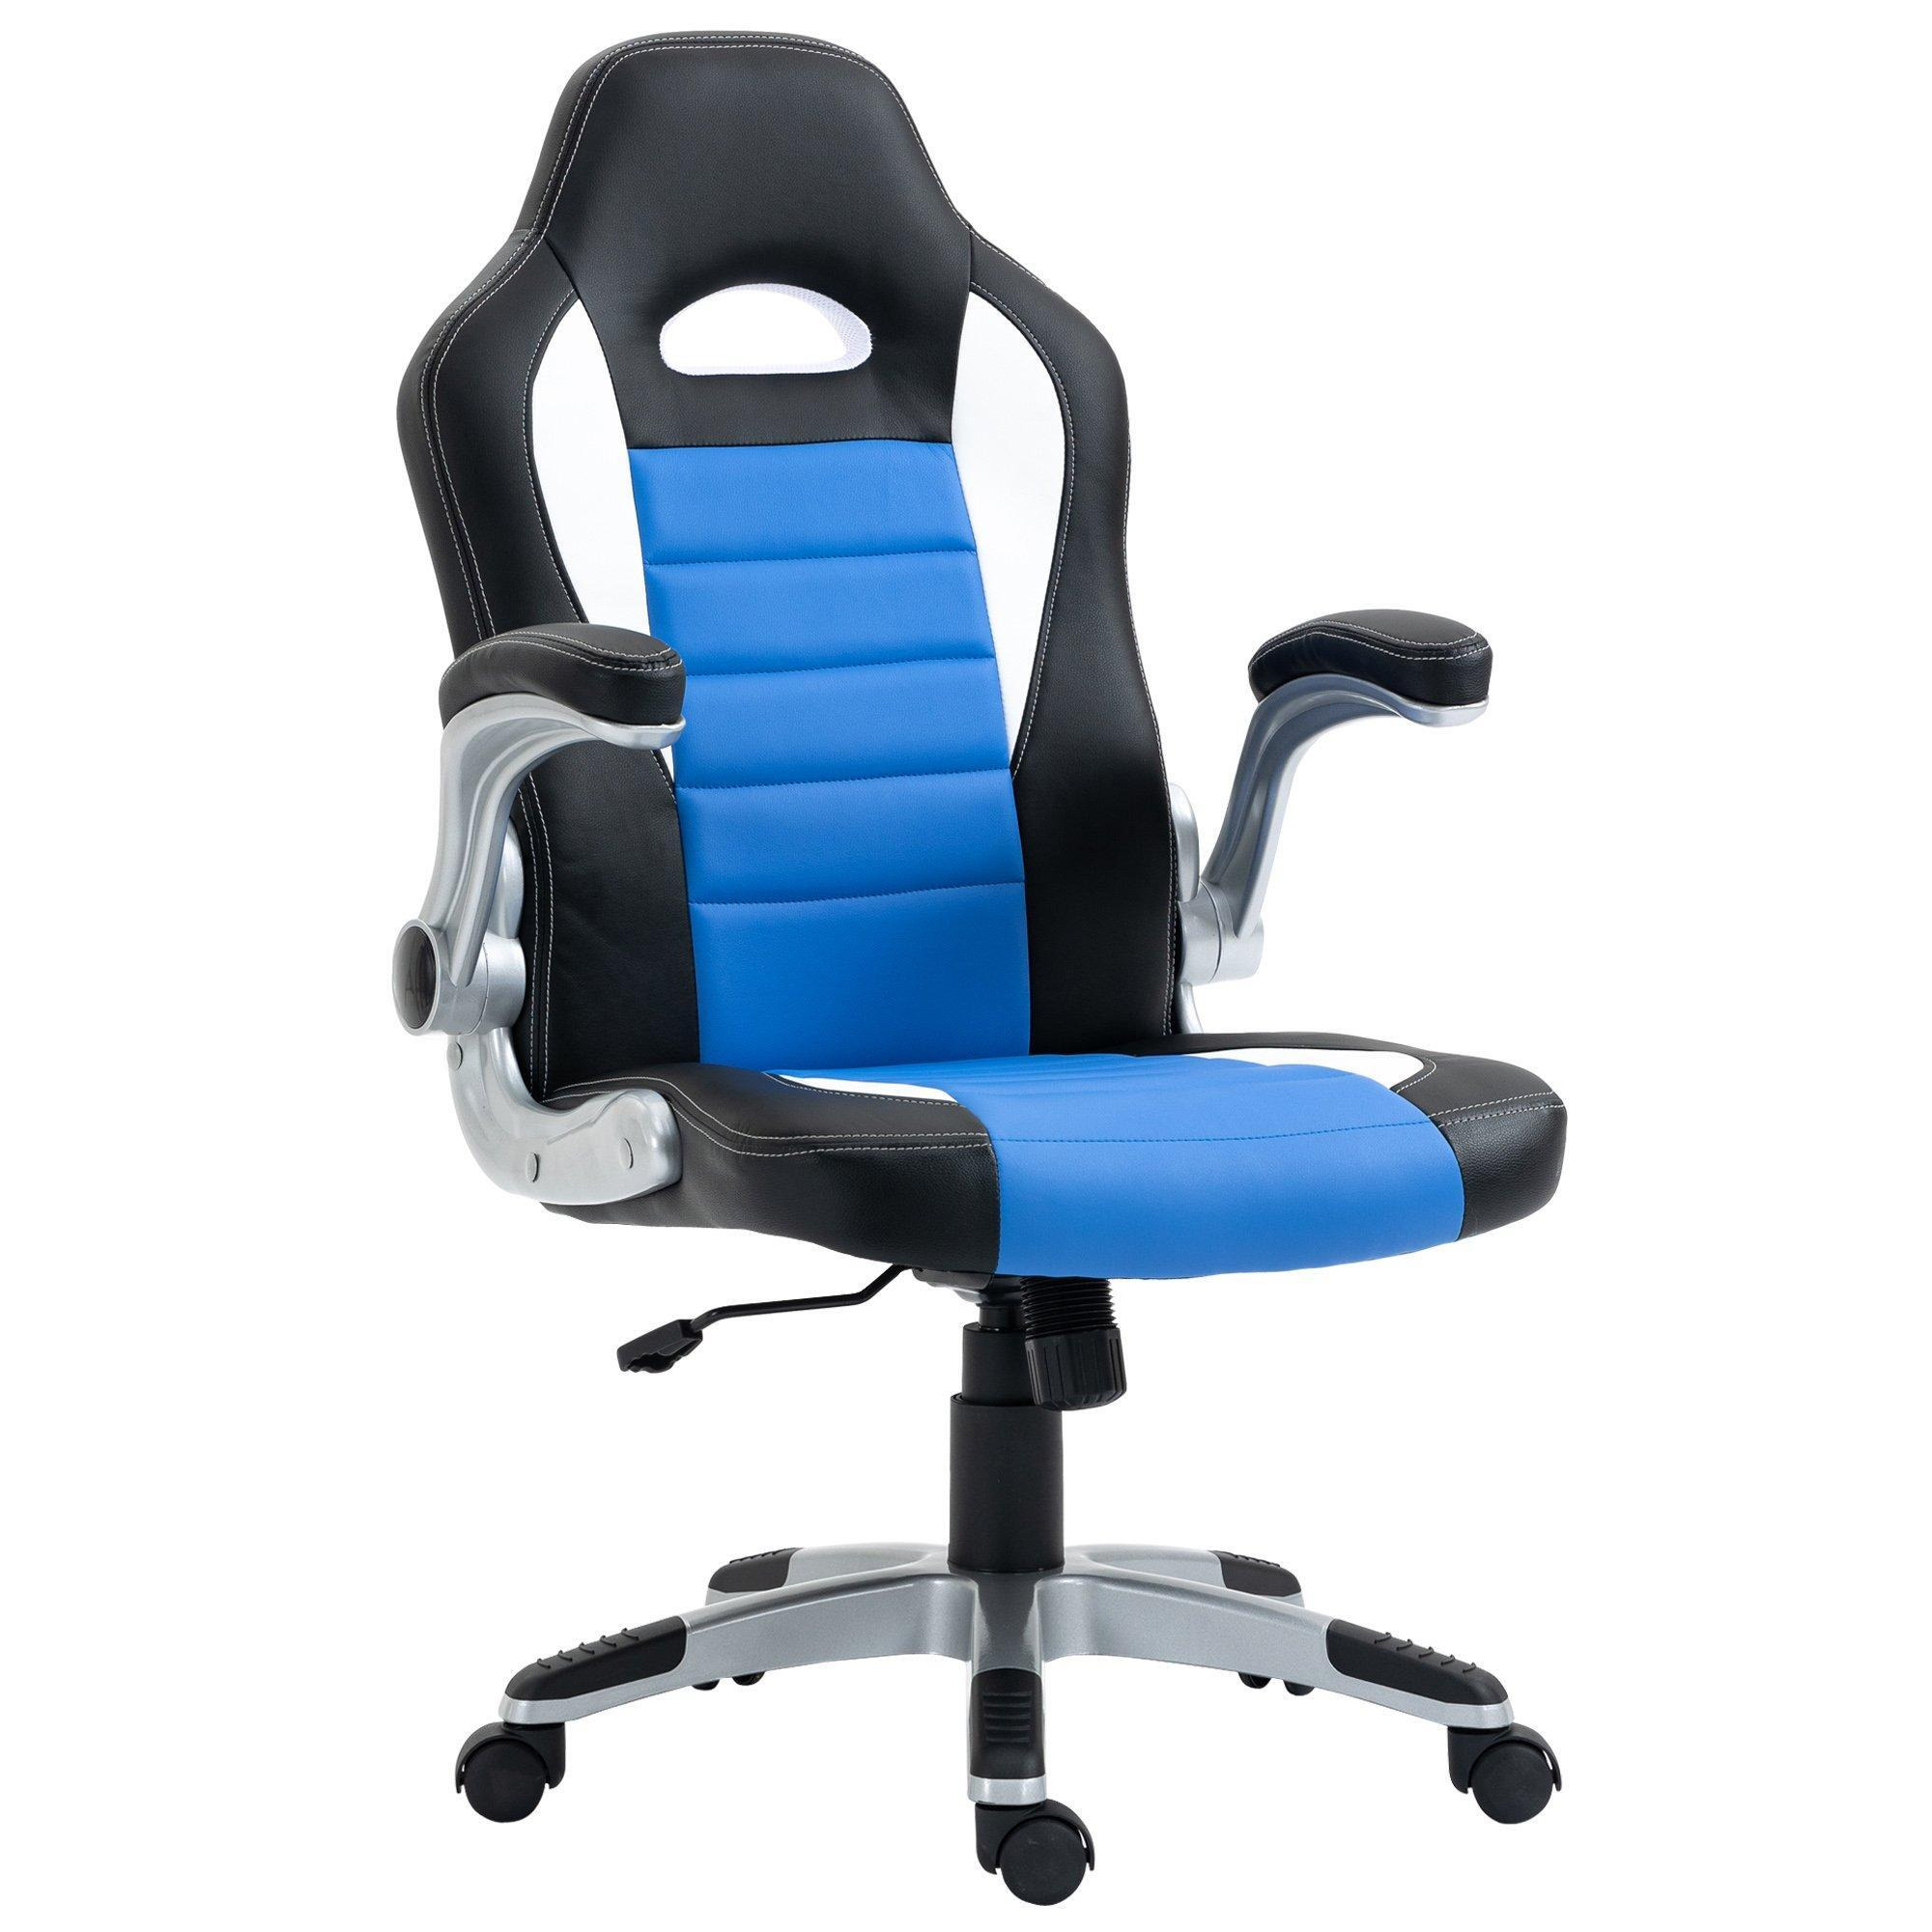 Racing Gaming Chair Height Adjustable Swivel with Flip Up Armrests - image 1